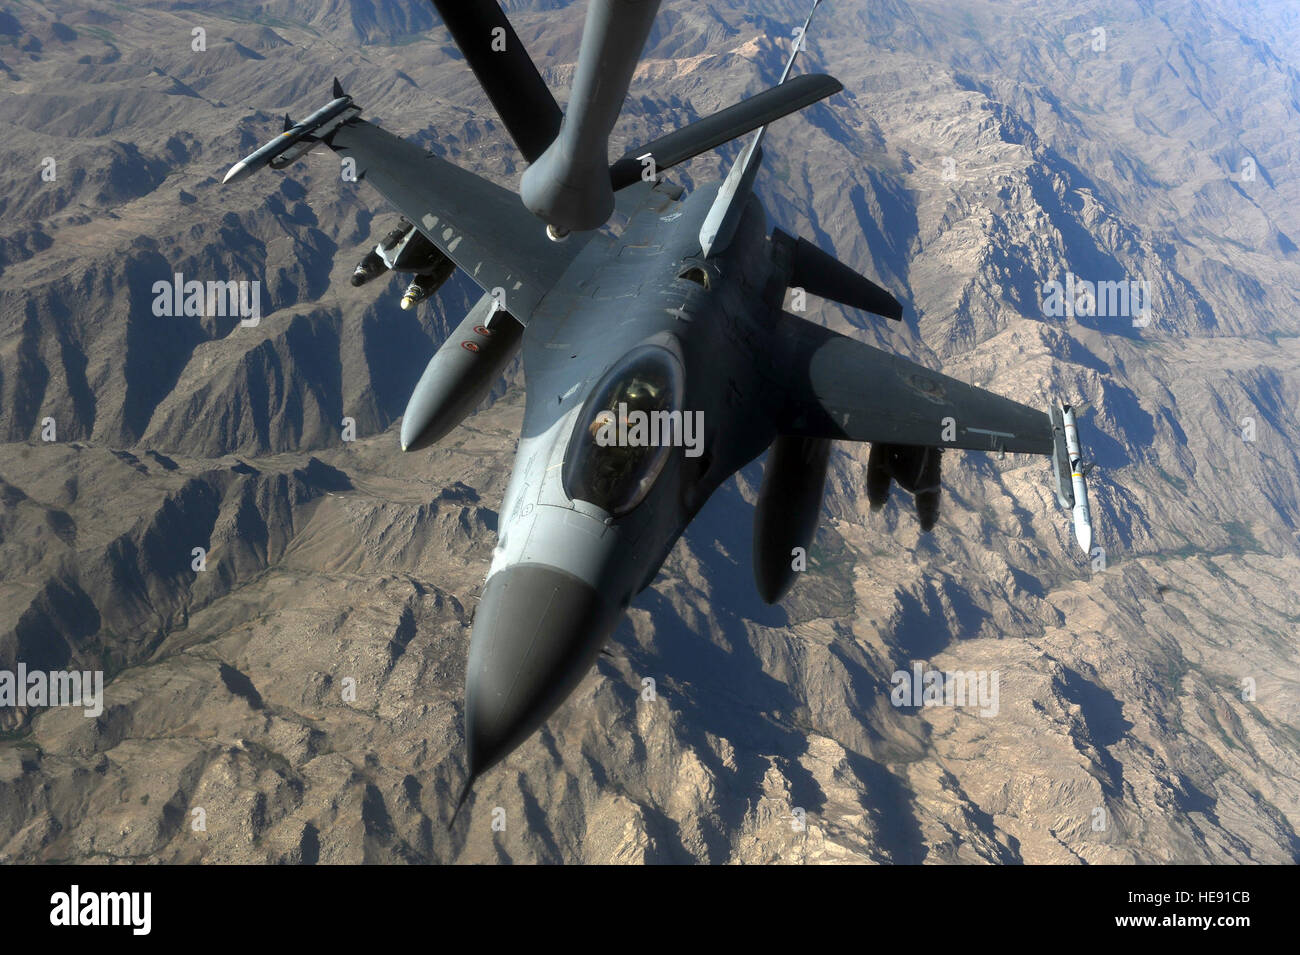 A F-16 Fighting Falcon, from the 555th Expeditionary Fighter Squadron, maneuvers into position to be refueled by a KC-135 Stratotanker, from the 340th Expeditionary Air Refueling Squadron, during an air refueling mission in the skies of Afghanistan supporting Operation Enduring Freedom, May 12, 2011.  Master Sgt. William Greer) Stock Photo